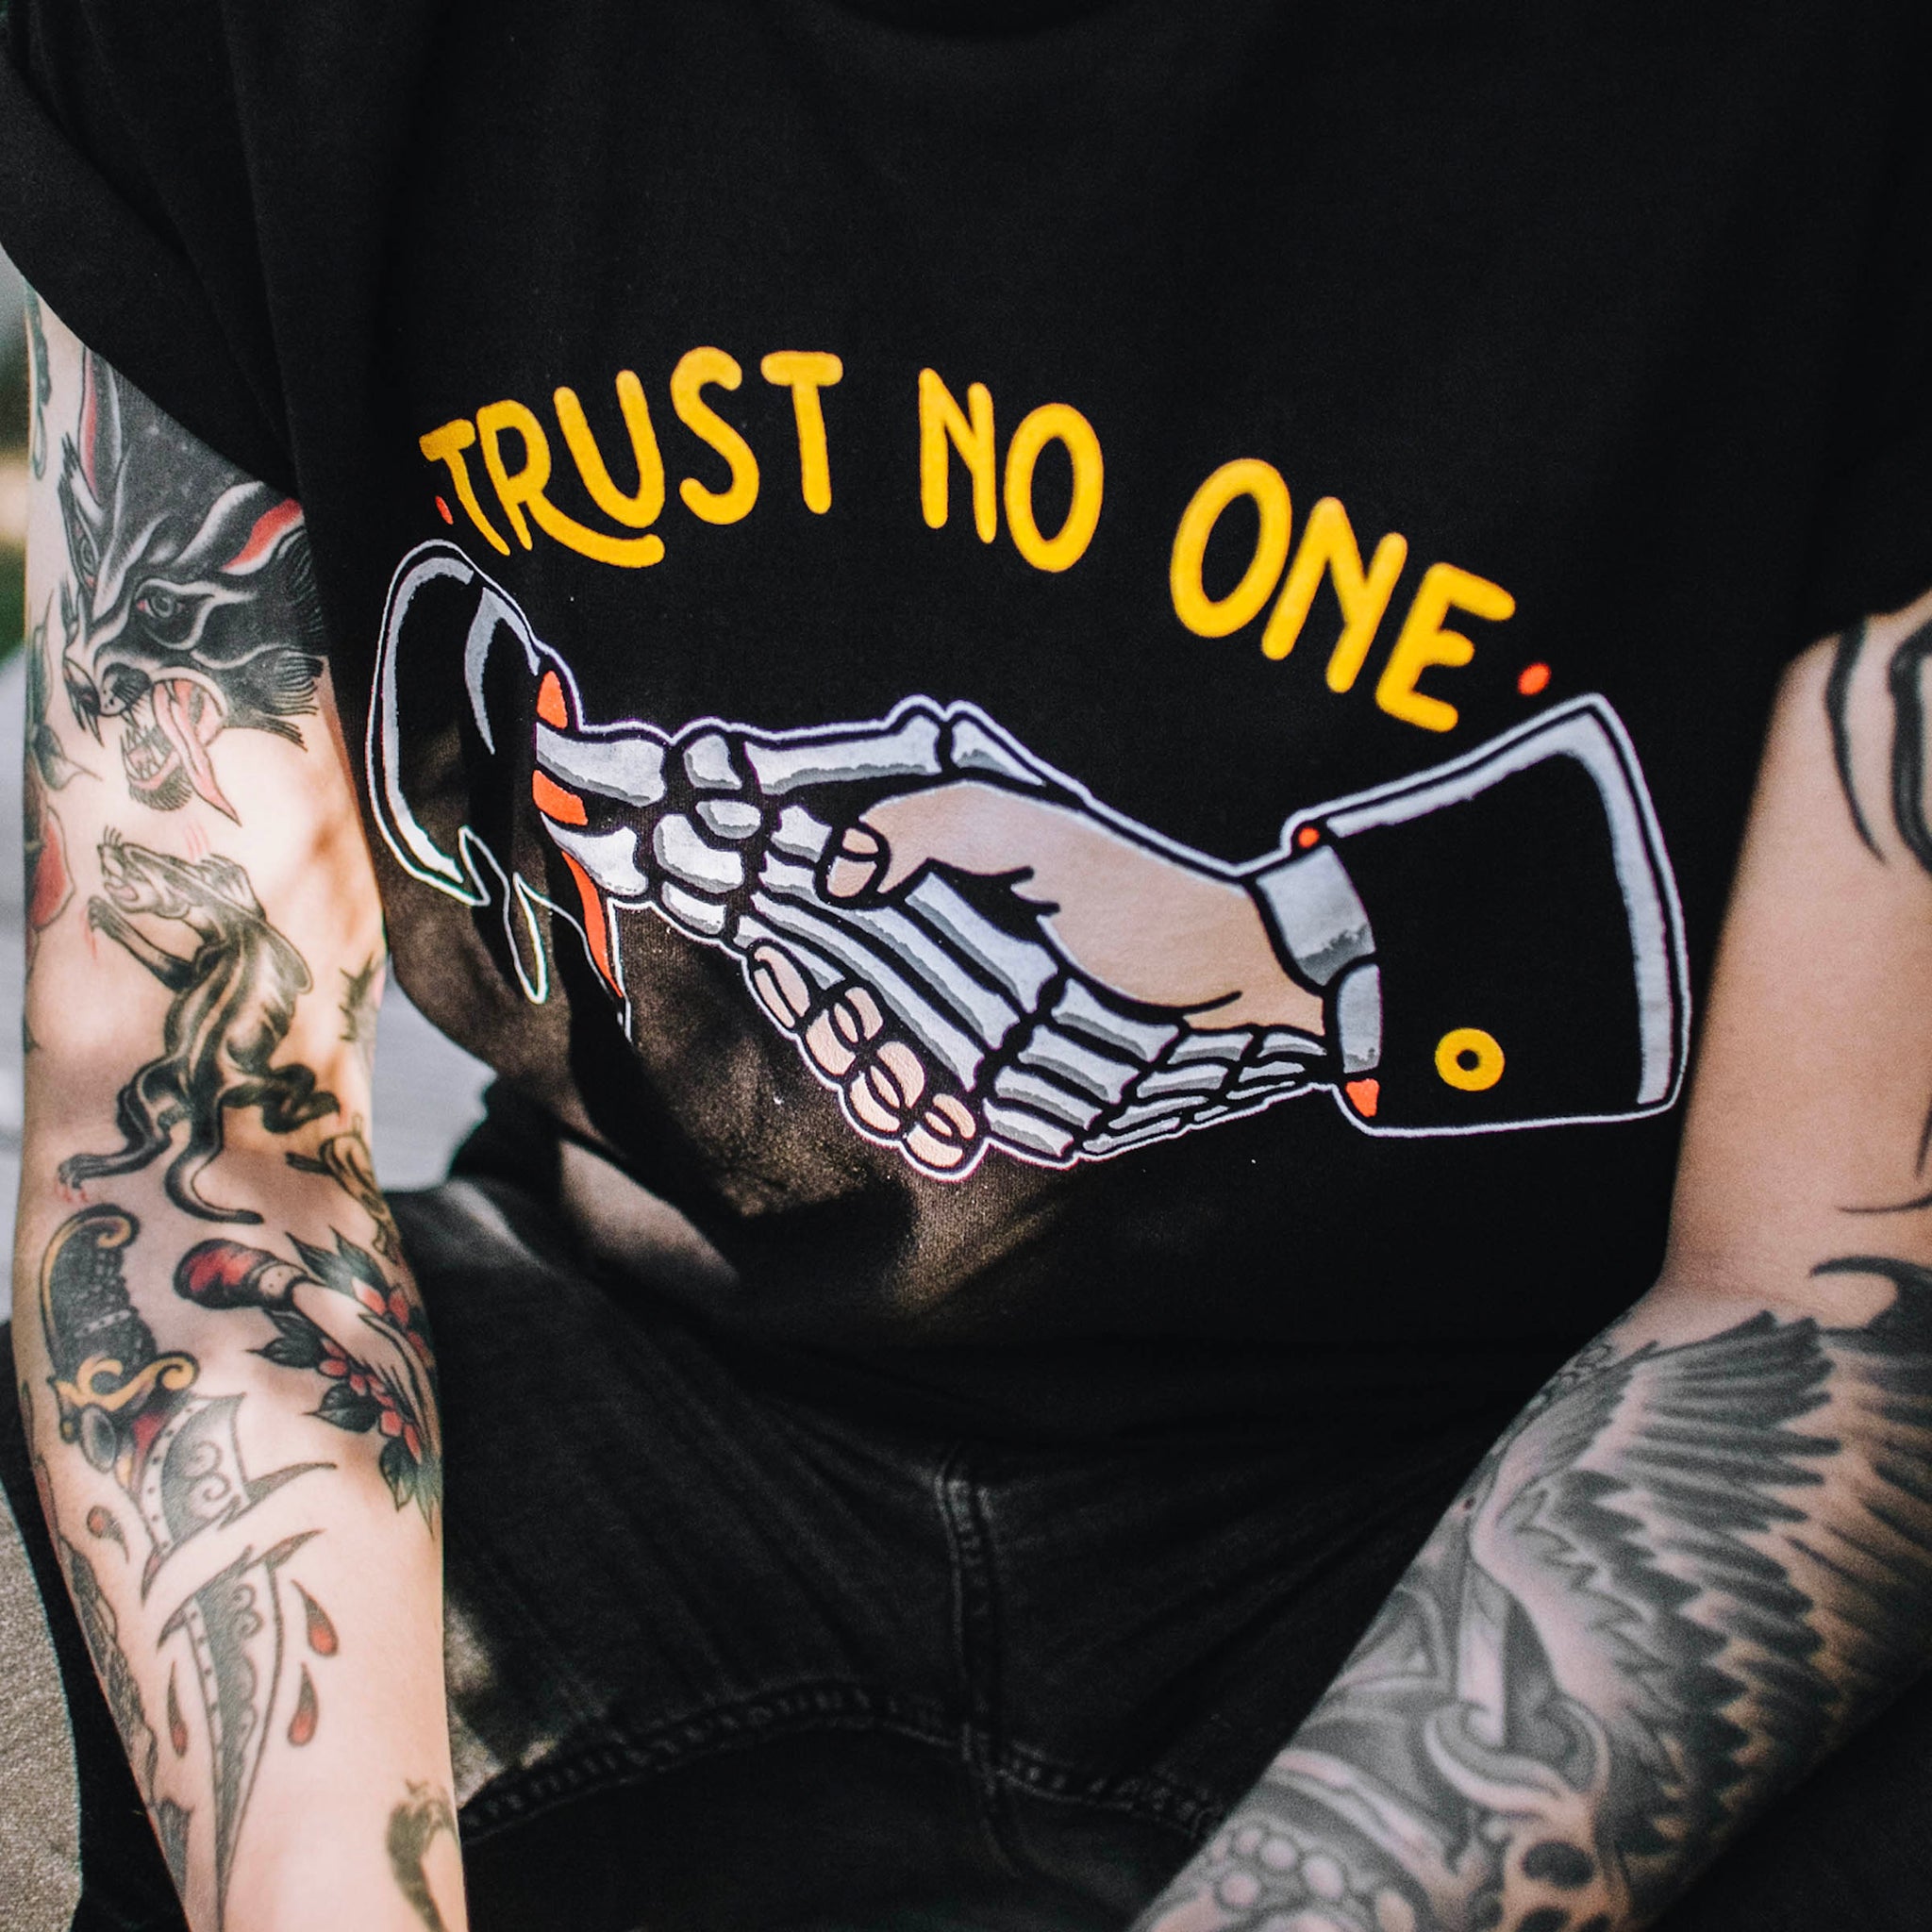 Womens Clothing Graphic Tee Old School Tattoo Tattoo Clothing Trust No One  TShirt Devil Shirt Traditional Tattoo Tops  Tees suriasabahcommy